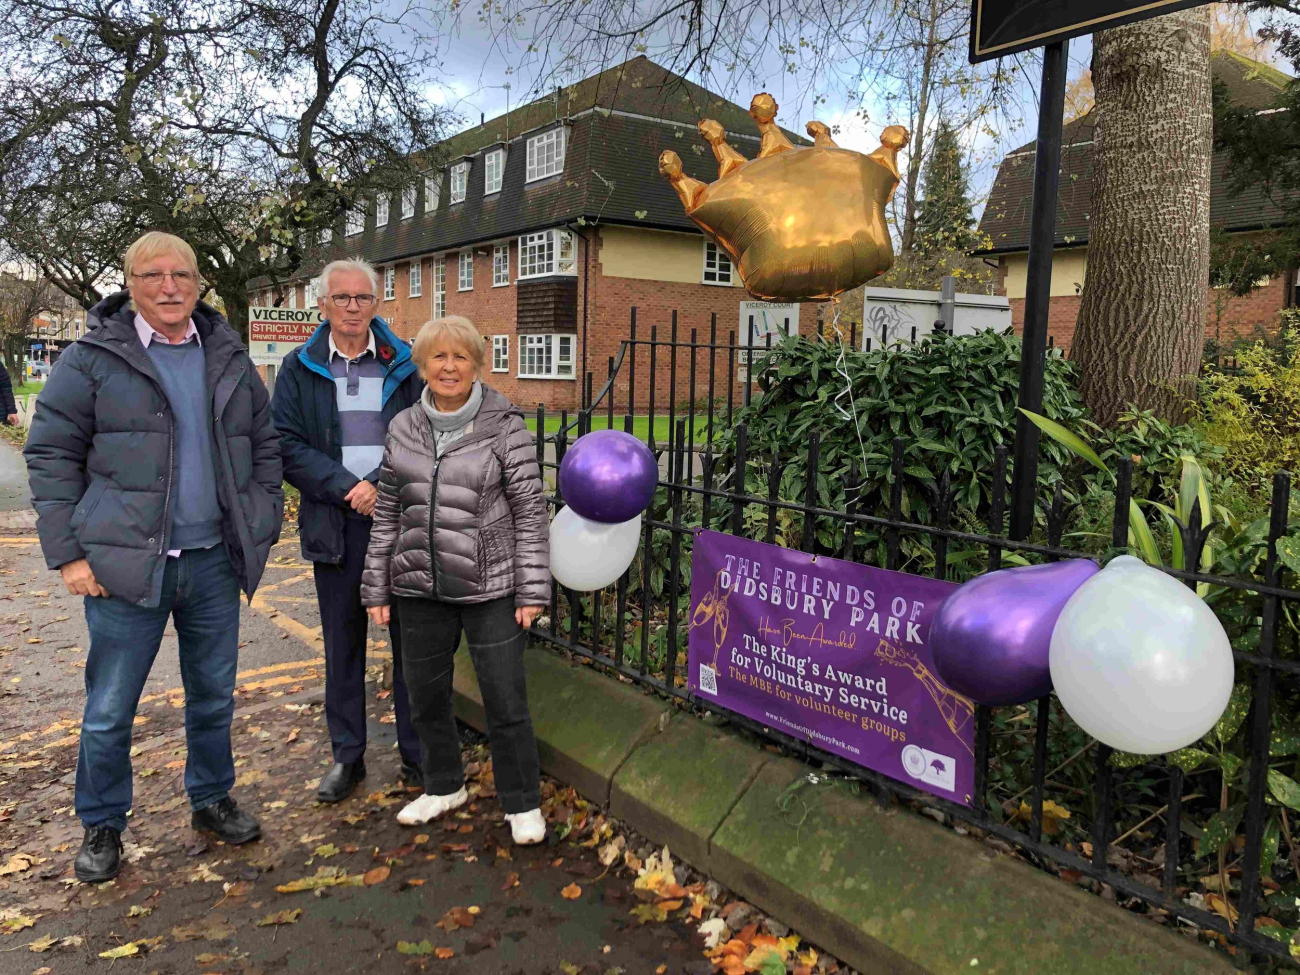 Friends of Didsbury Park members celebrating their Kinds Awards for Voluntary Service